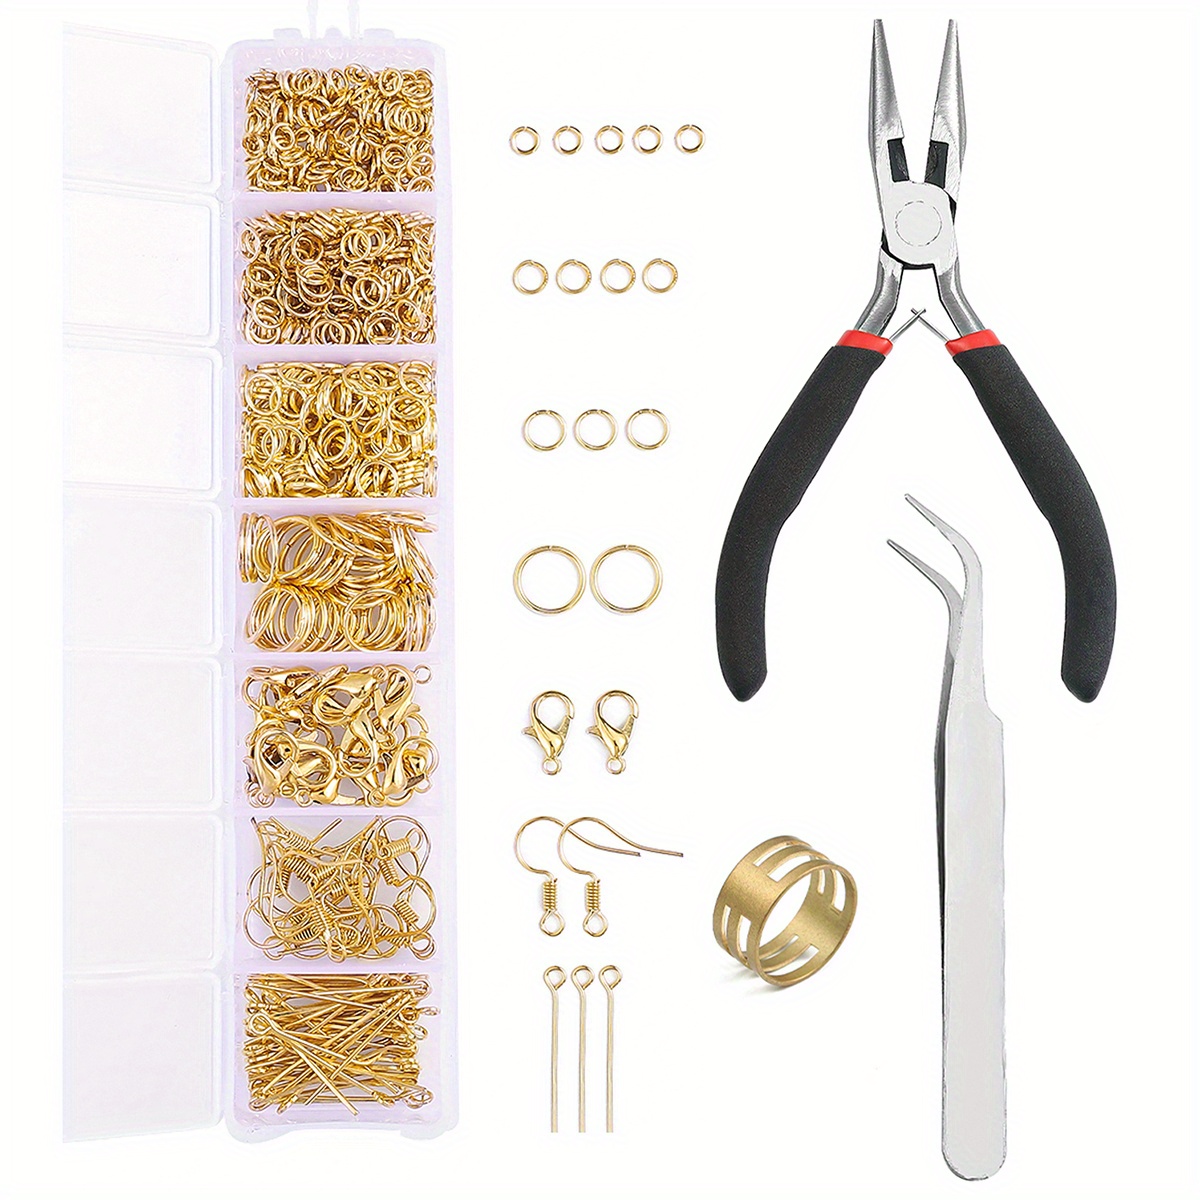 DIY Crafts Jewelry Necklace Repair Kit with Jump Rings, Clasps and